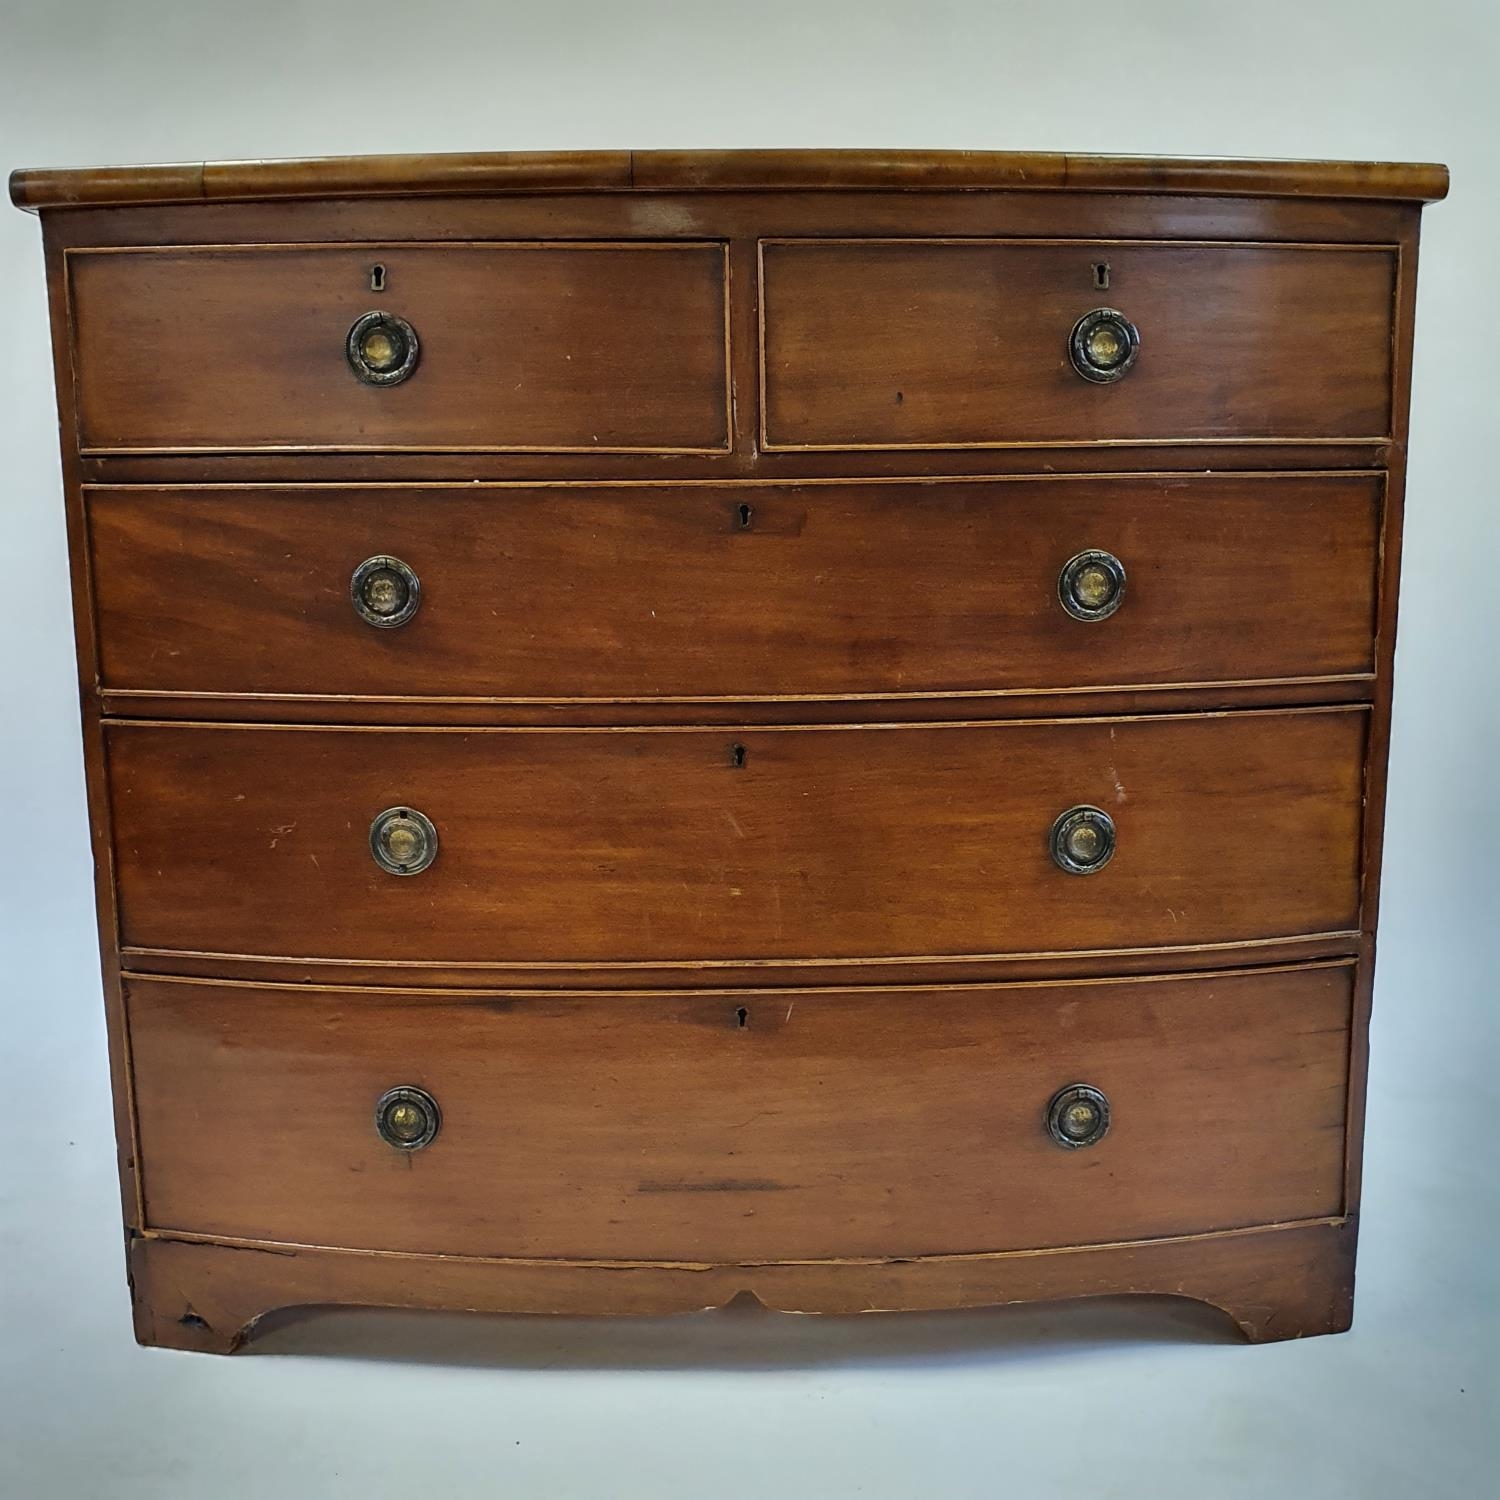 A 19th century mahogany bow front chest, having two short and three long drawers, 100 cm wide